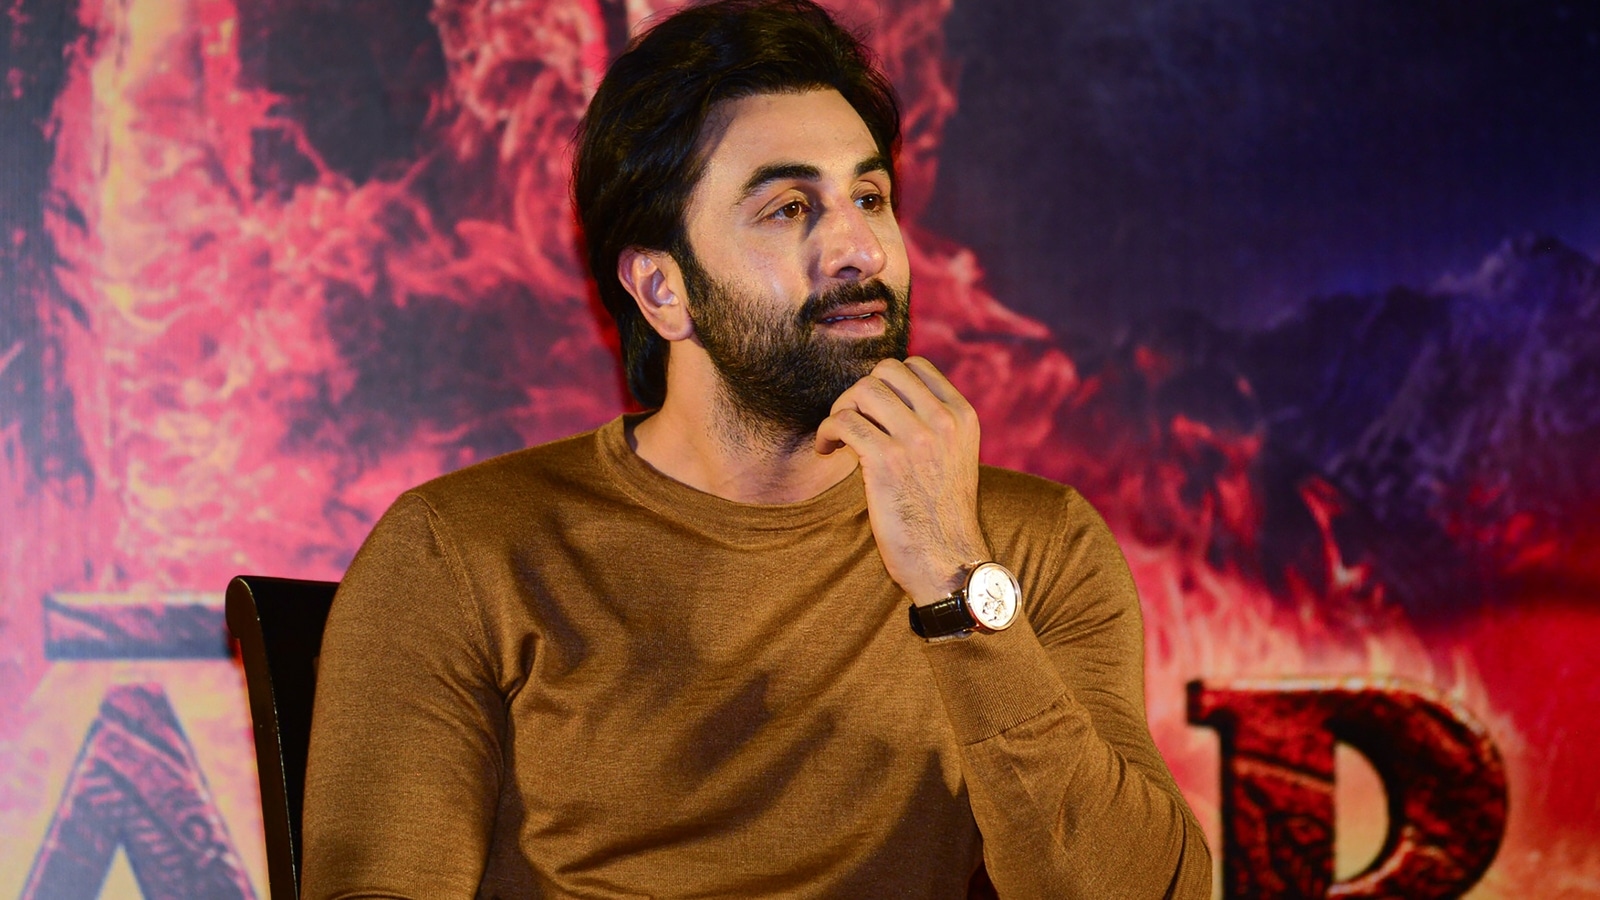 Brahmastra’s reported budget figures are ‘all wrong’, says Ranbir Kapoor as he defends film’s ‘hit’ status